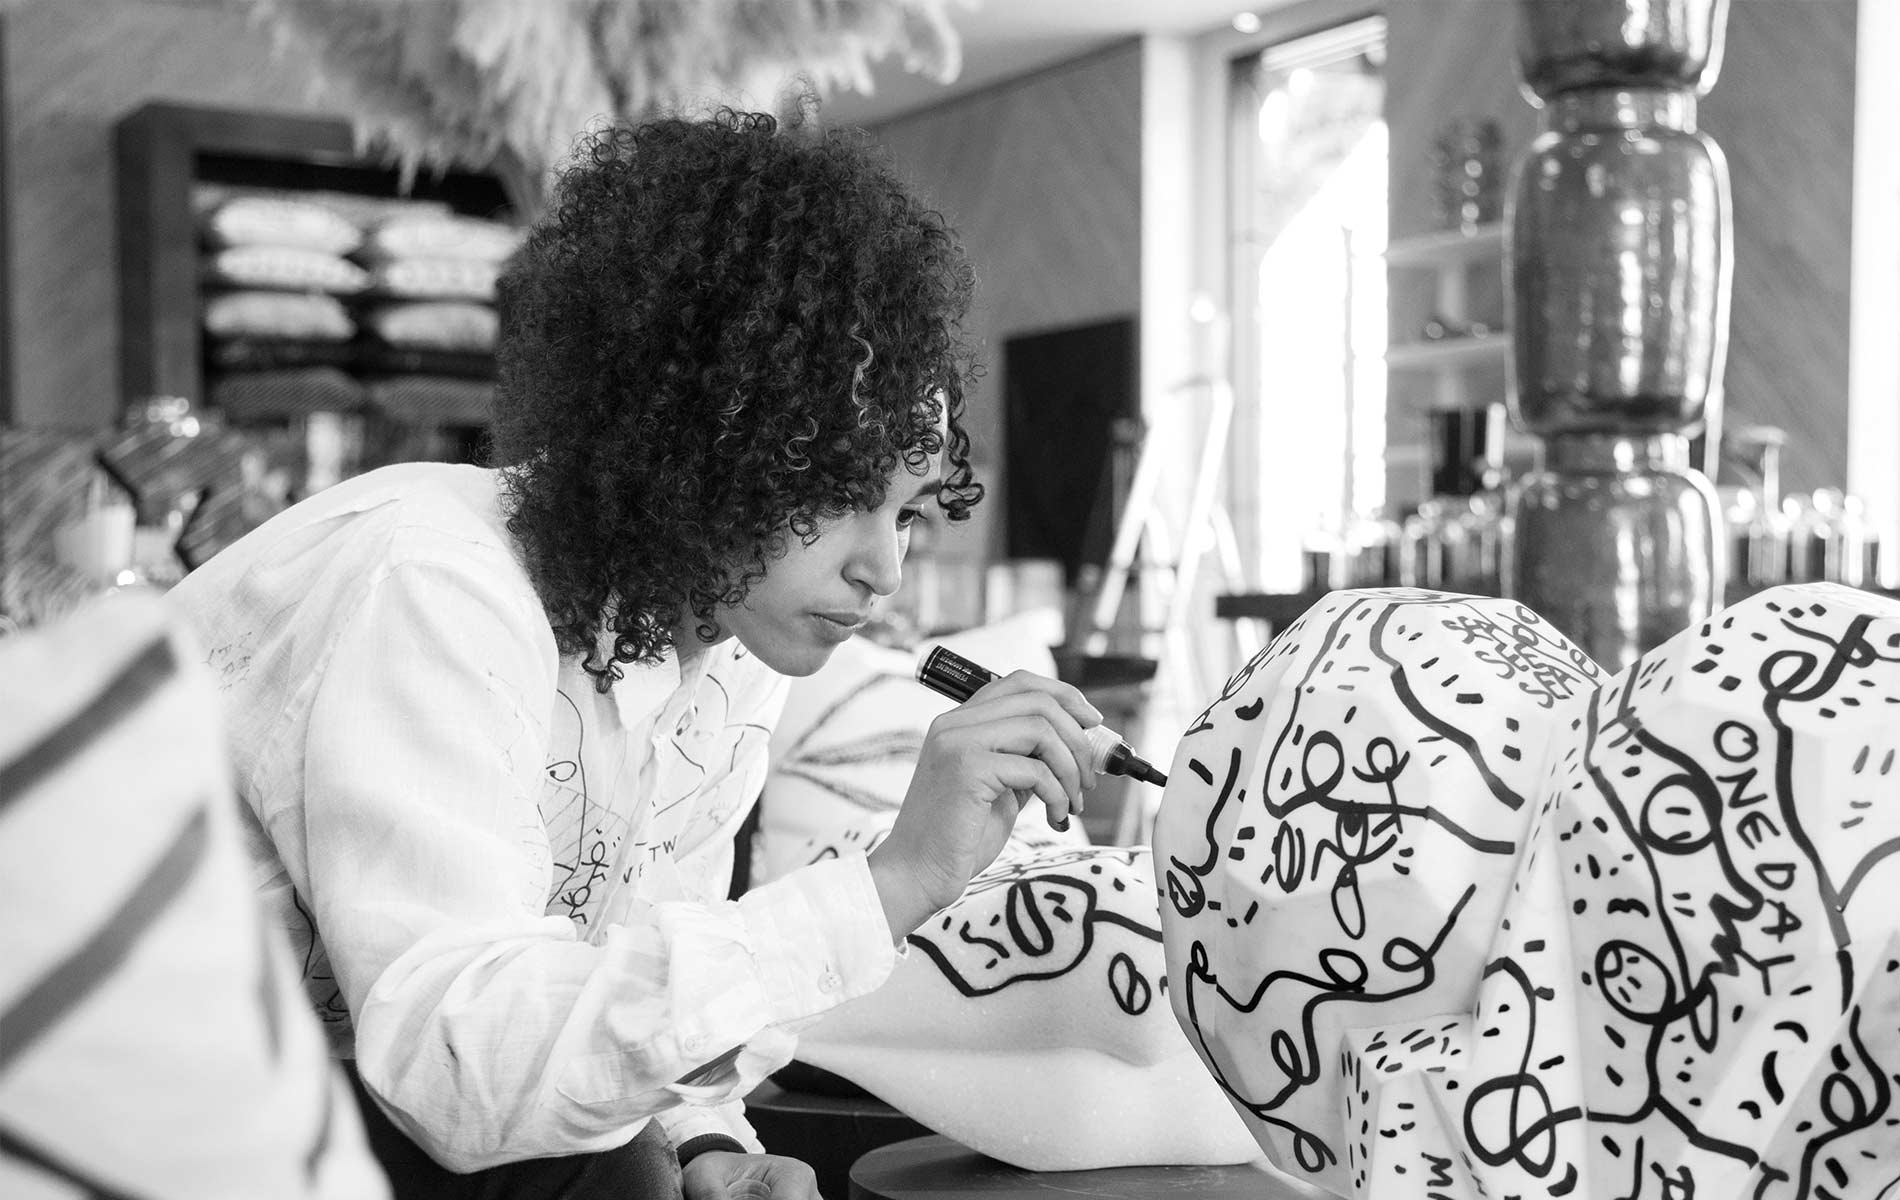 Shantell Martin works on project in Los Angeles